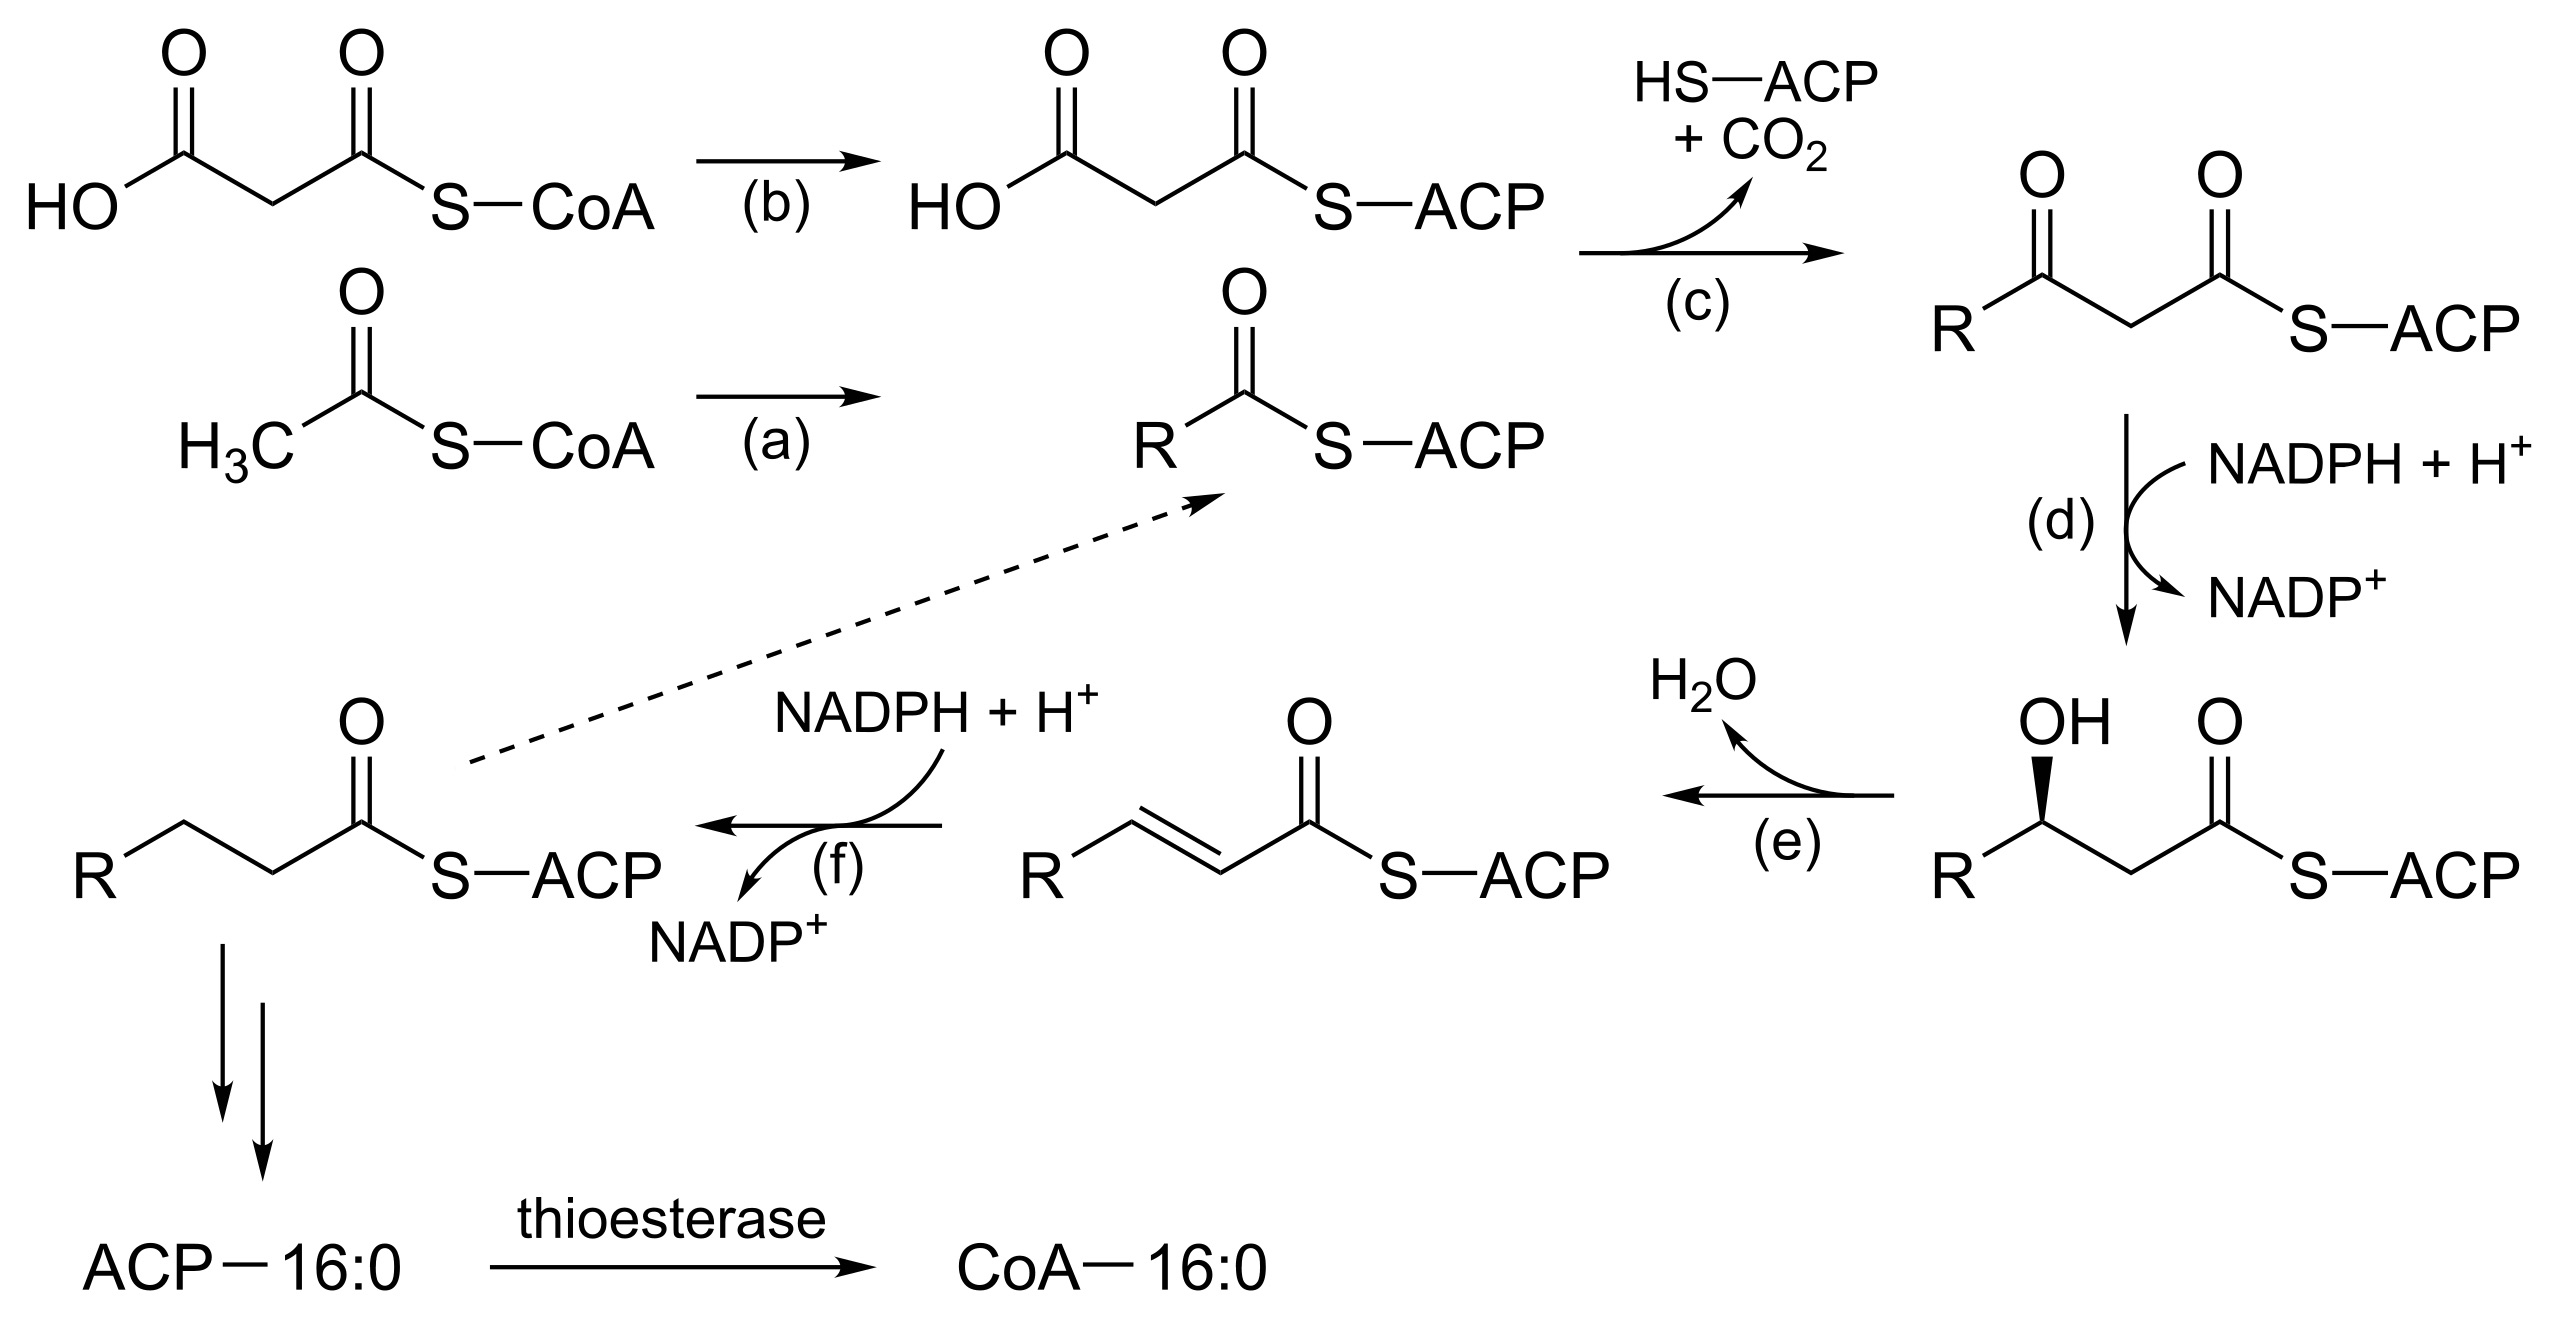 Saturated Fatty Acid Synthesis Synthesis of saturated fatty acids via fatty acid synthase II in E. coli